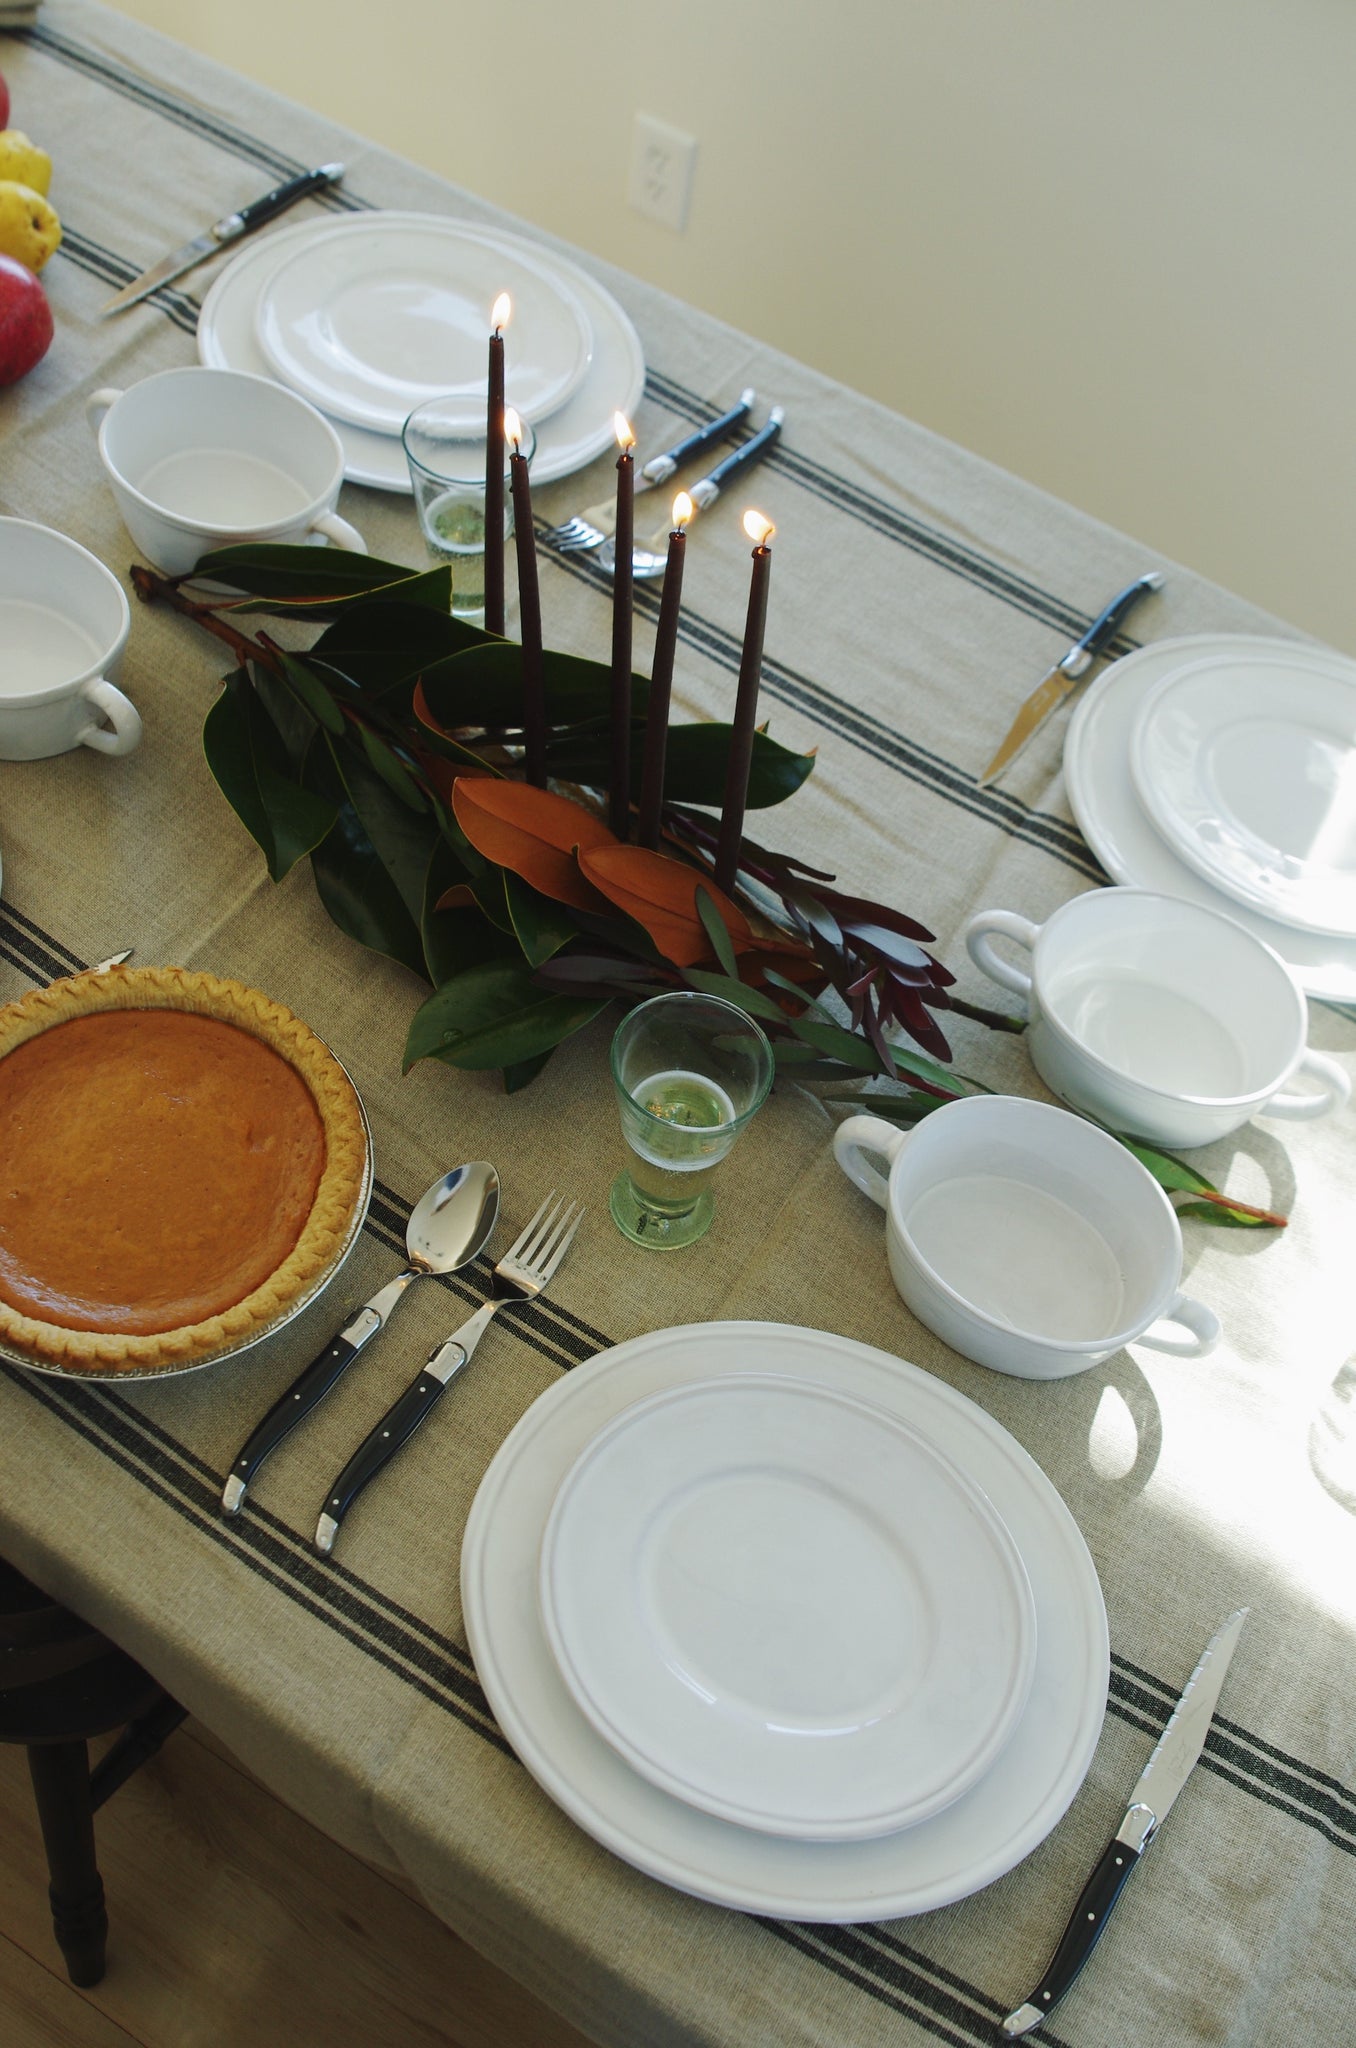 Linen tablecloth with black stripes. On the table are white ceramic plates and bowls. Magnolia leaf garland next to pie.